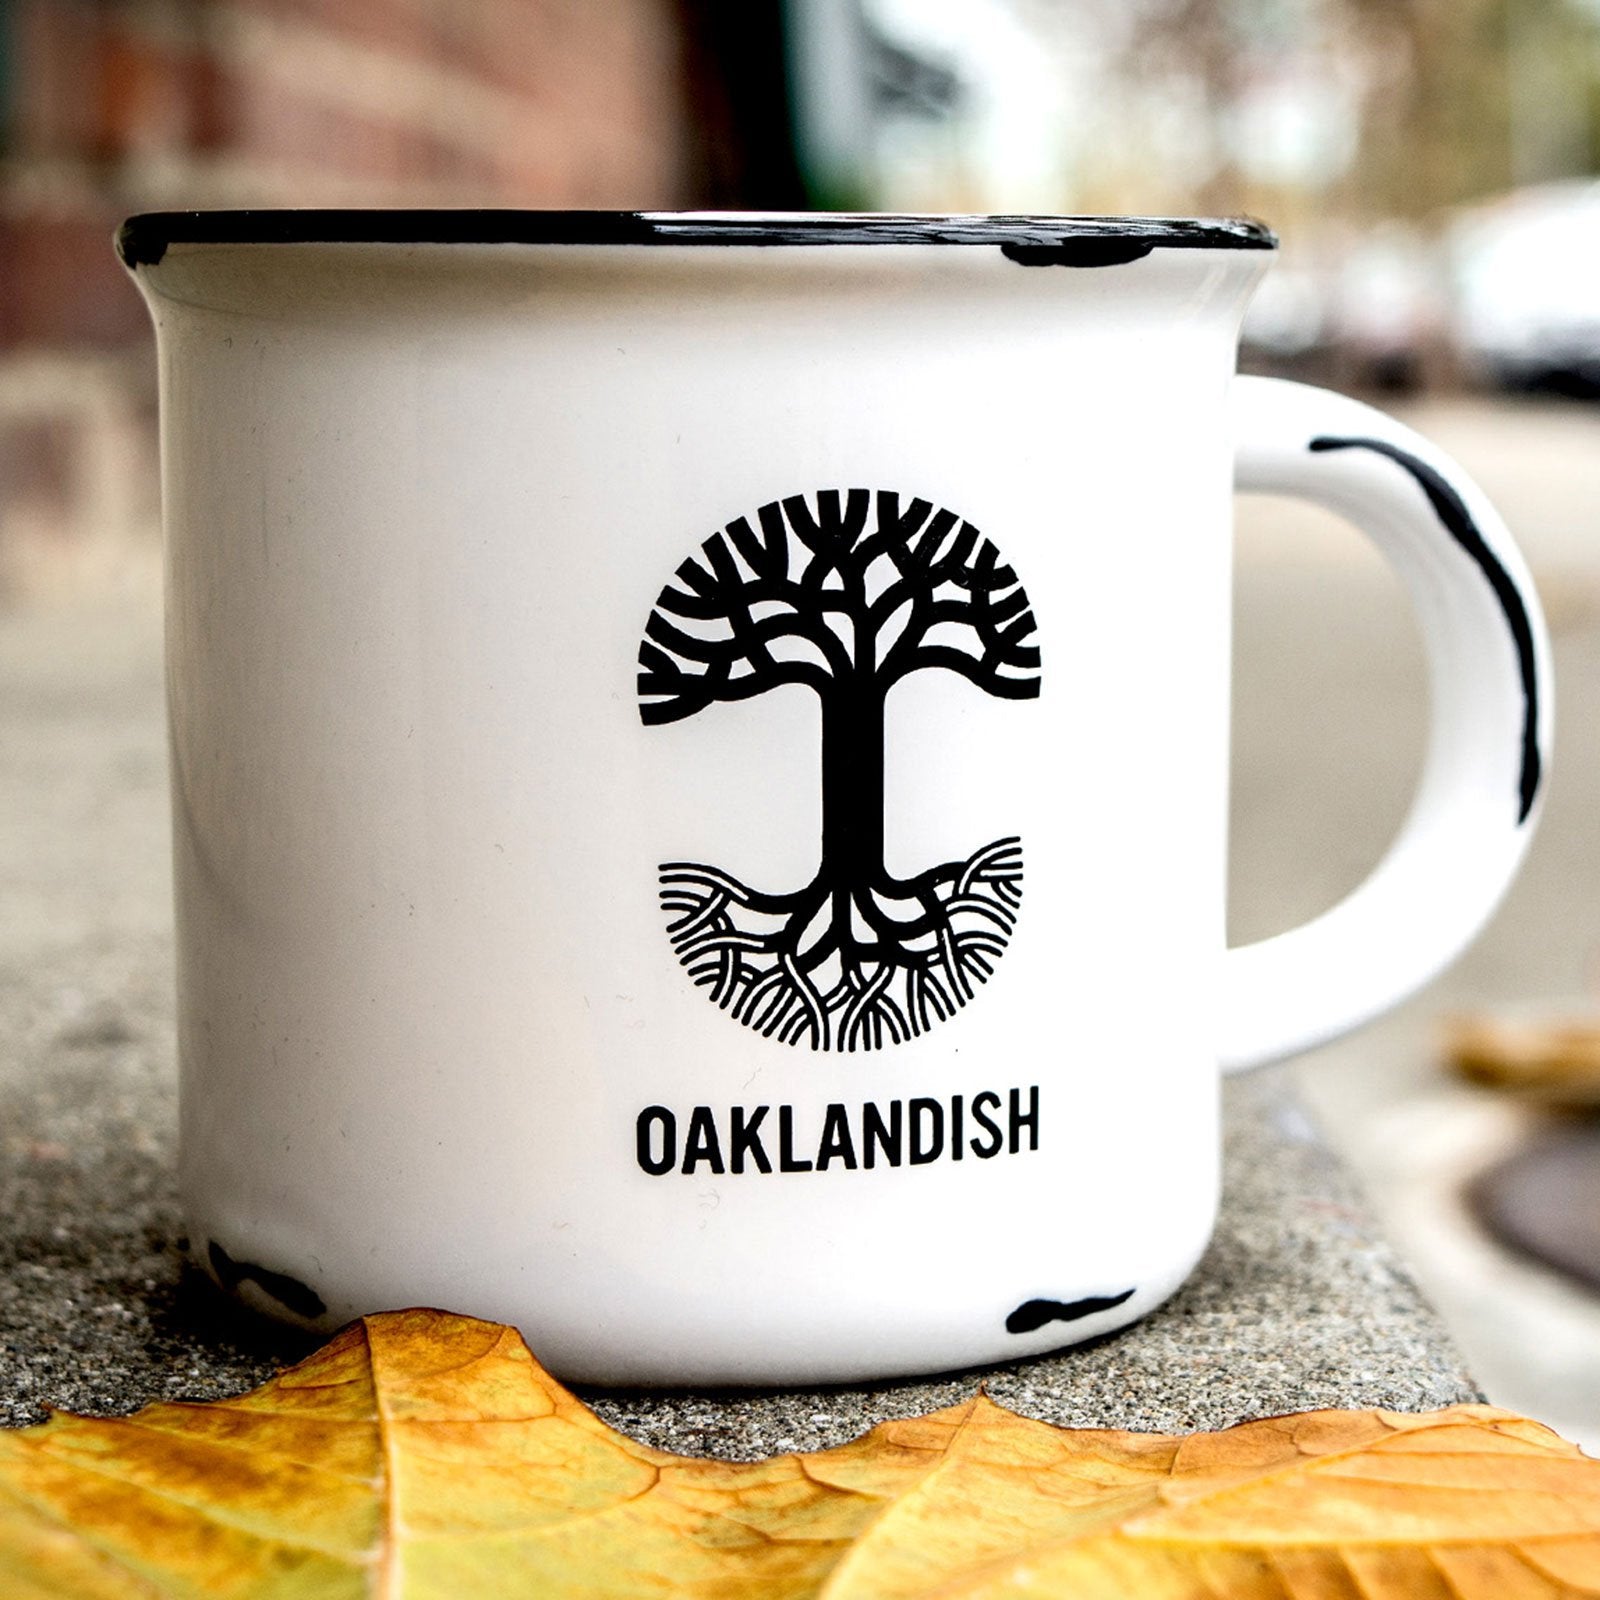 Front view of a white stoneware coffee mug featuring a retro style black Oaklandish tree logo on a cement table with a maple leaf.